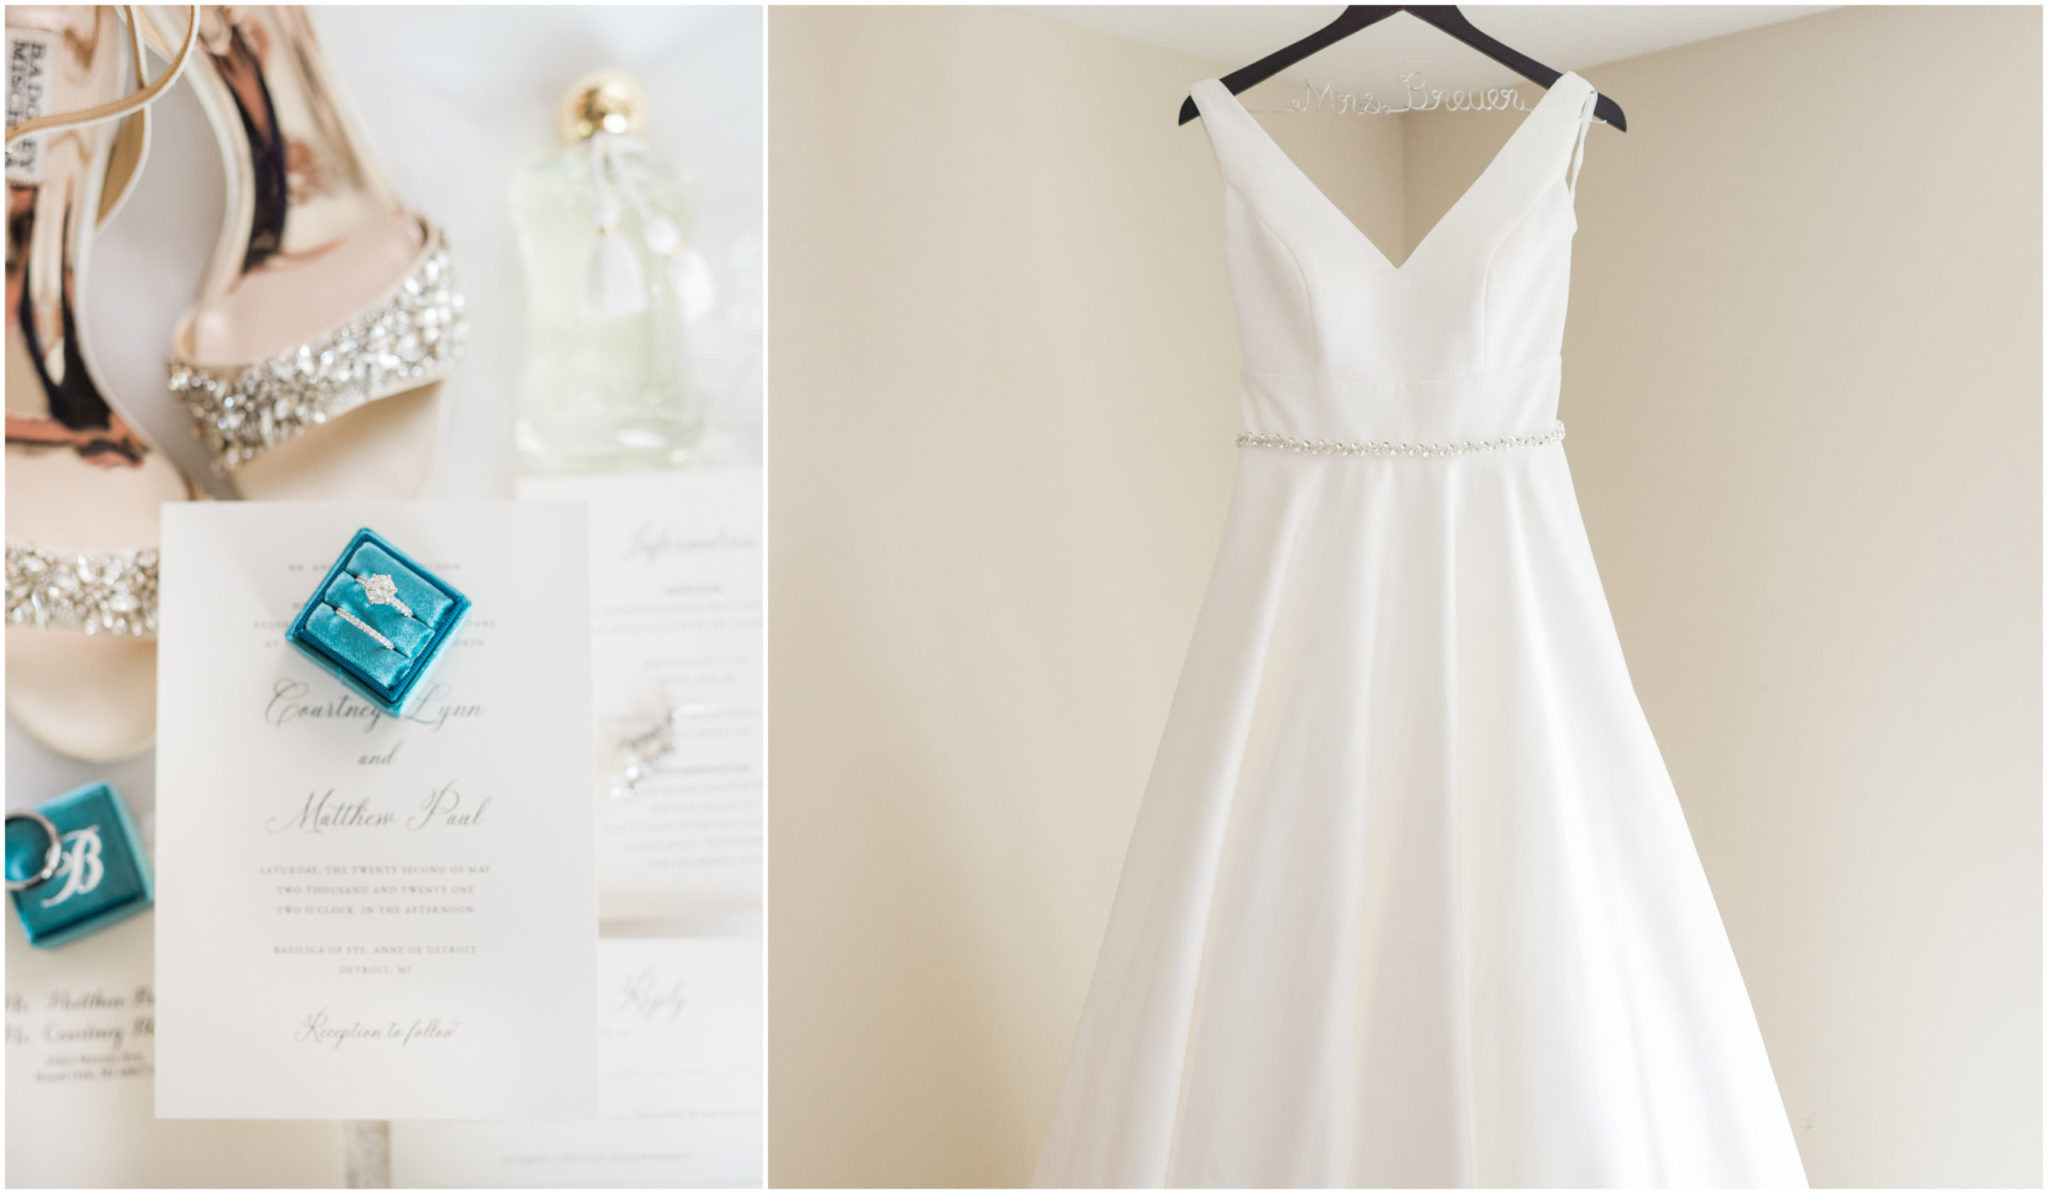 collaged image of wedding day details including wedding dress, engagement ring, bride's shoes